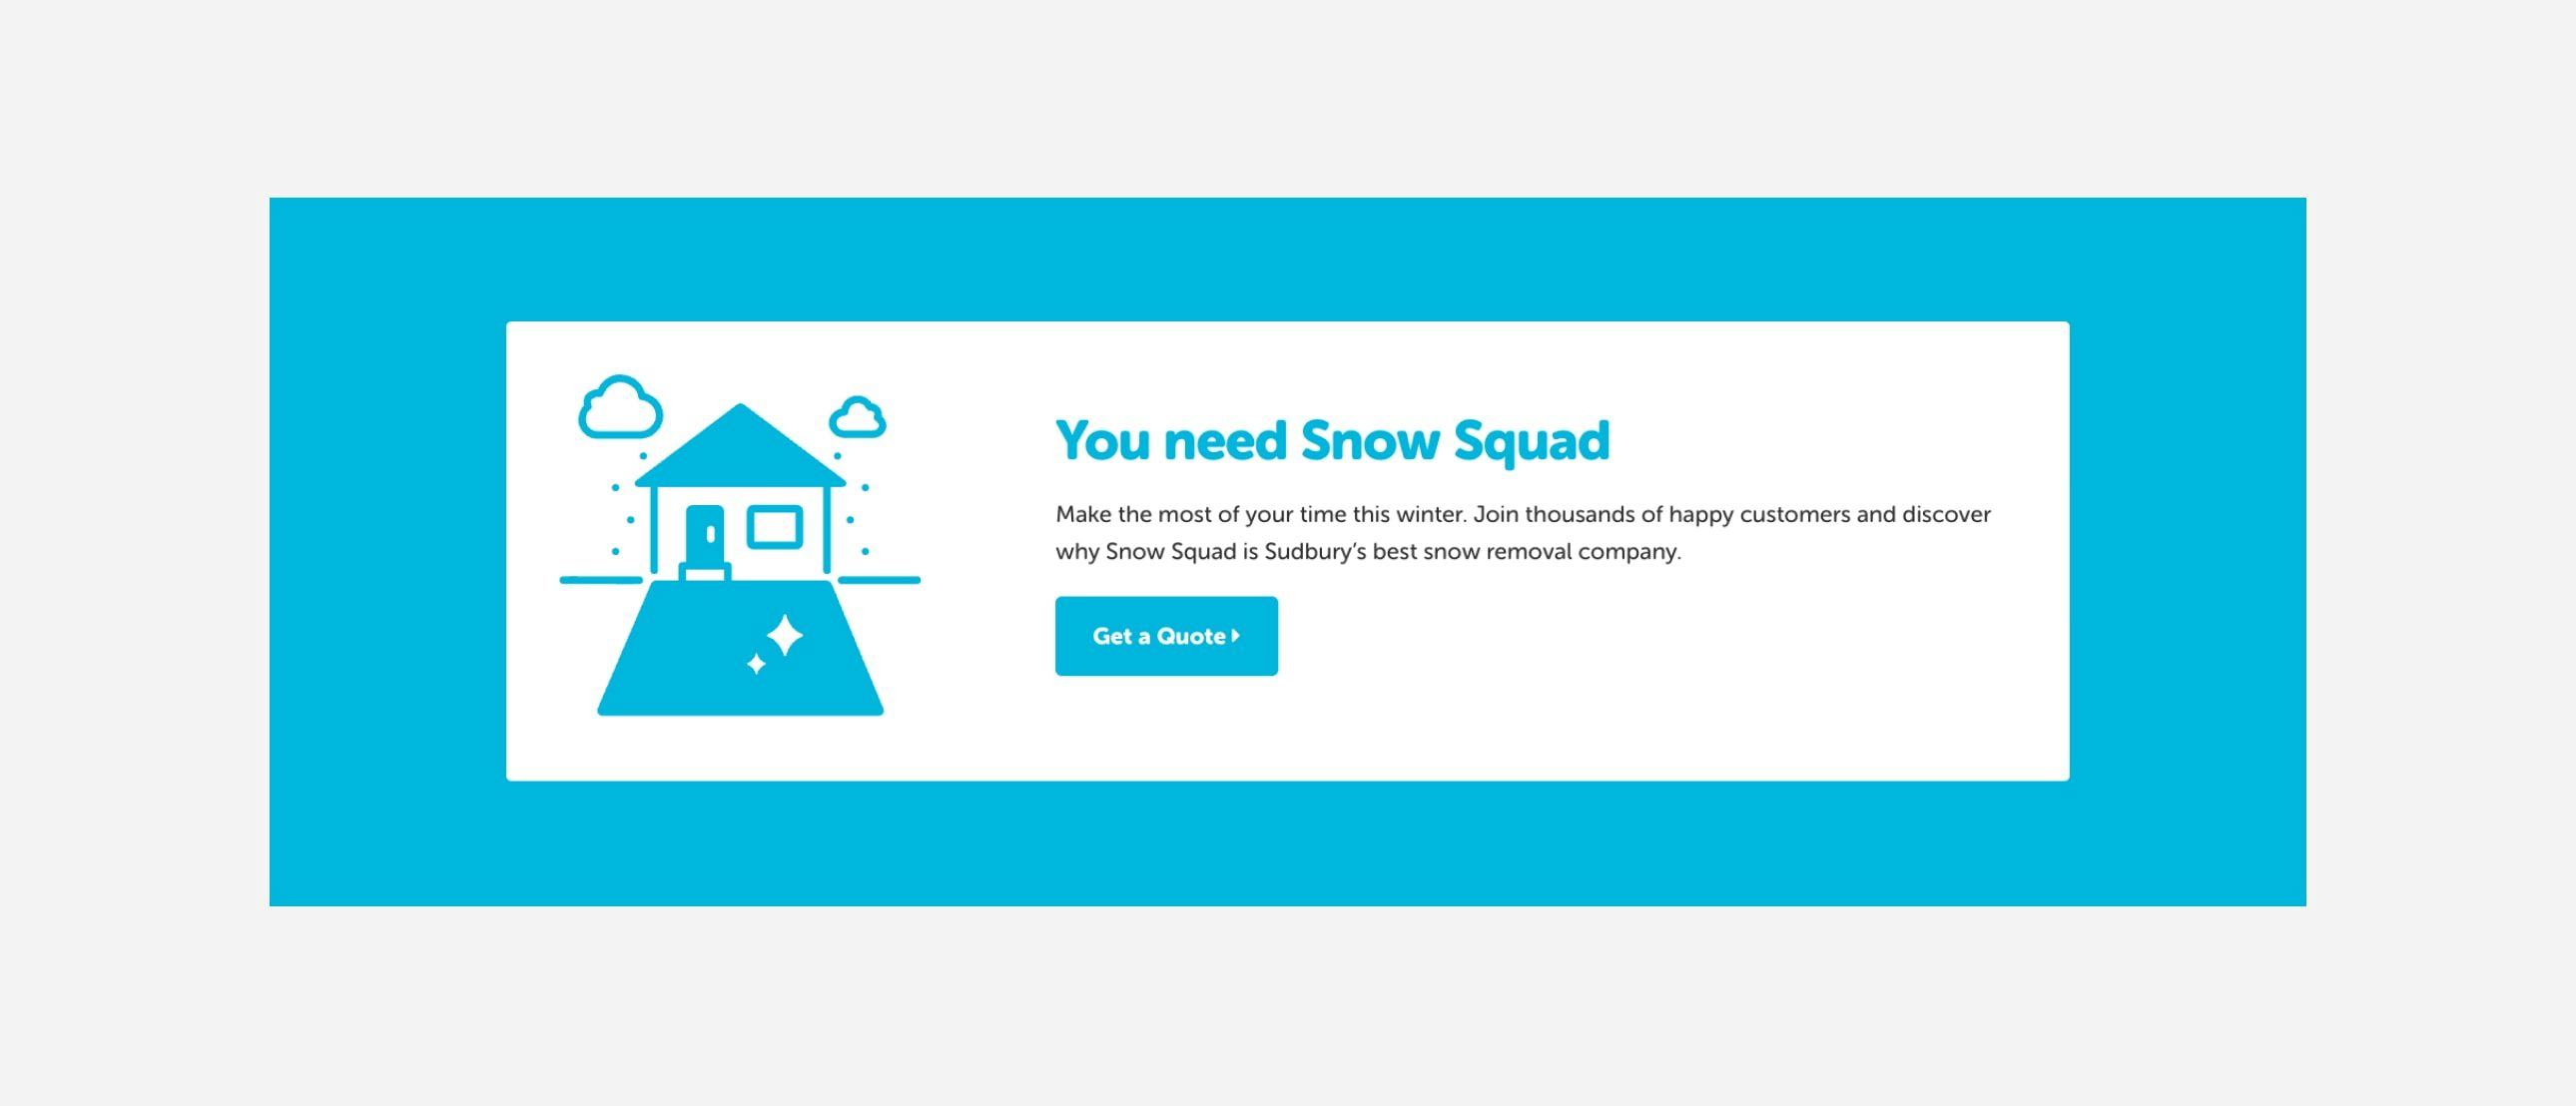 You Need Snow Squad panel from Snow Squad website with playful illustration